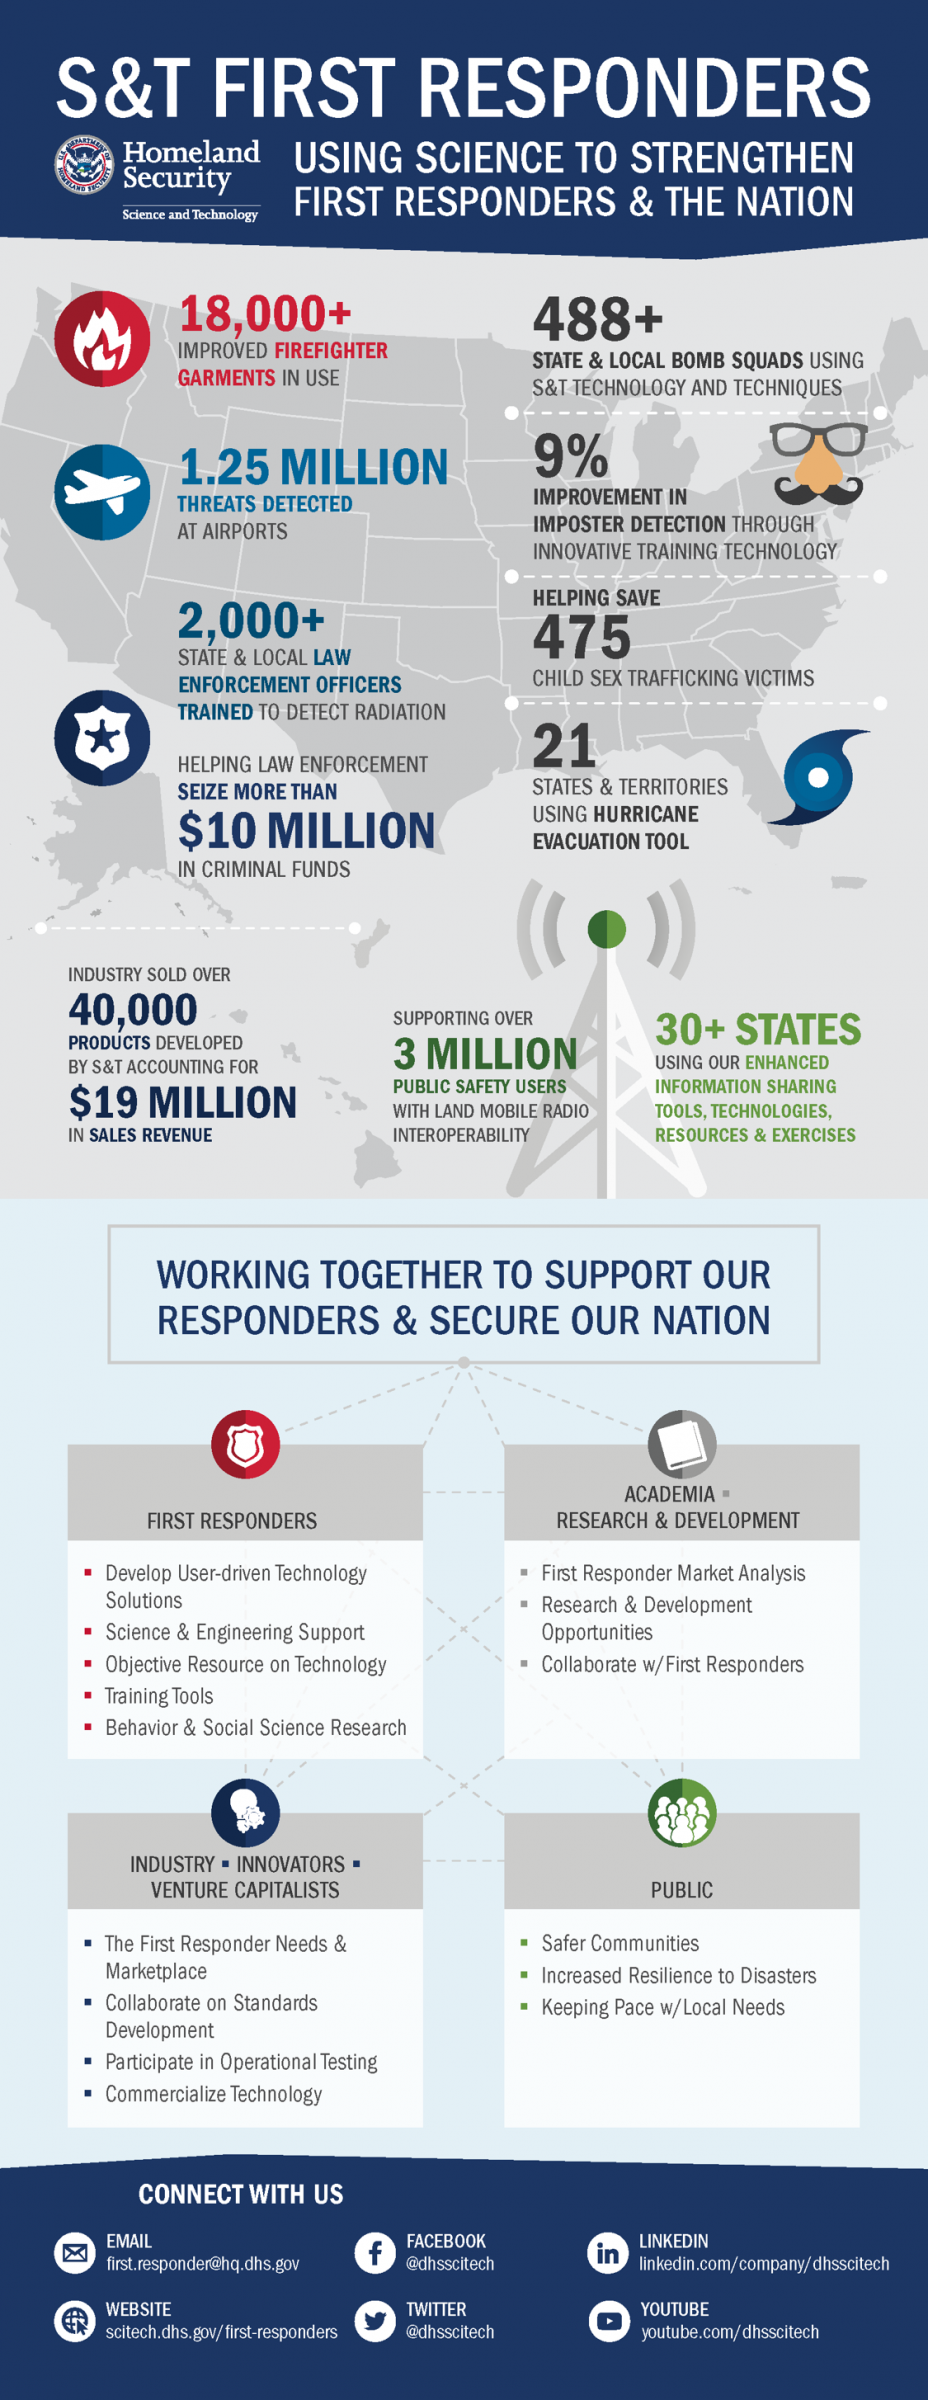 S&T First Responders Group, using science to strengthen first responders and the nation. 18,000+ Improved firefighter garments. 1.25 million threats detected. 2,000+ state and local law enforcement officers trained to detect radiation. Helping law enforcement seize more than $10 million in criminal funds. Industry sold over 40,000 products developed by S&T accounting for $19 Million in sales revenue. Supporting over 3 million public safety users with and mobile radio interoperability. 30+ states using our enhanced information sharing tools, technologies, resources & exercises.488+ state and local bomb squads using S&T technology and techniques. 9% improvement in imposter detection through innovative training technology. Helping safe 475 child sex trafficking victims. 21 state and terrirtories using hurricane evacuation tool. Working together to support our responders and secure our nation. First Responders: Develop user-driven technology solutions; science and engineering support; objective resource on technology; training tools; behavior and social science research; Academia and research & development: first responder market analysis; research and development opportunities; collaborate with first responders. Industry, innovations, venture capitalists: The first responder needs and marketplace, collaborate on standards development; partcipate in operational testing, and commercialize technology. Public: safer communities, increased resilience to disasters, and keeping pace with local needs. Connect with us. Email first.responders@hq.dhs.gov. Facebook: @firstrespondersgroup. Linkedin" linkedin.com/company/dhsscitech. Website: scitech.dhs/first-responders. Twitter: @dhsscitech. Youtube: youtube.com/dhsscitech.